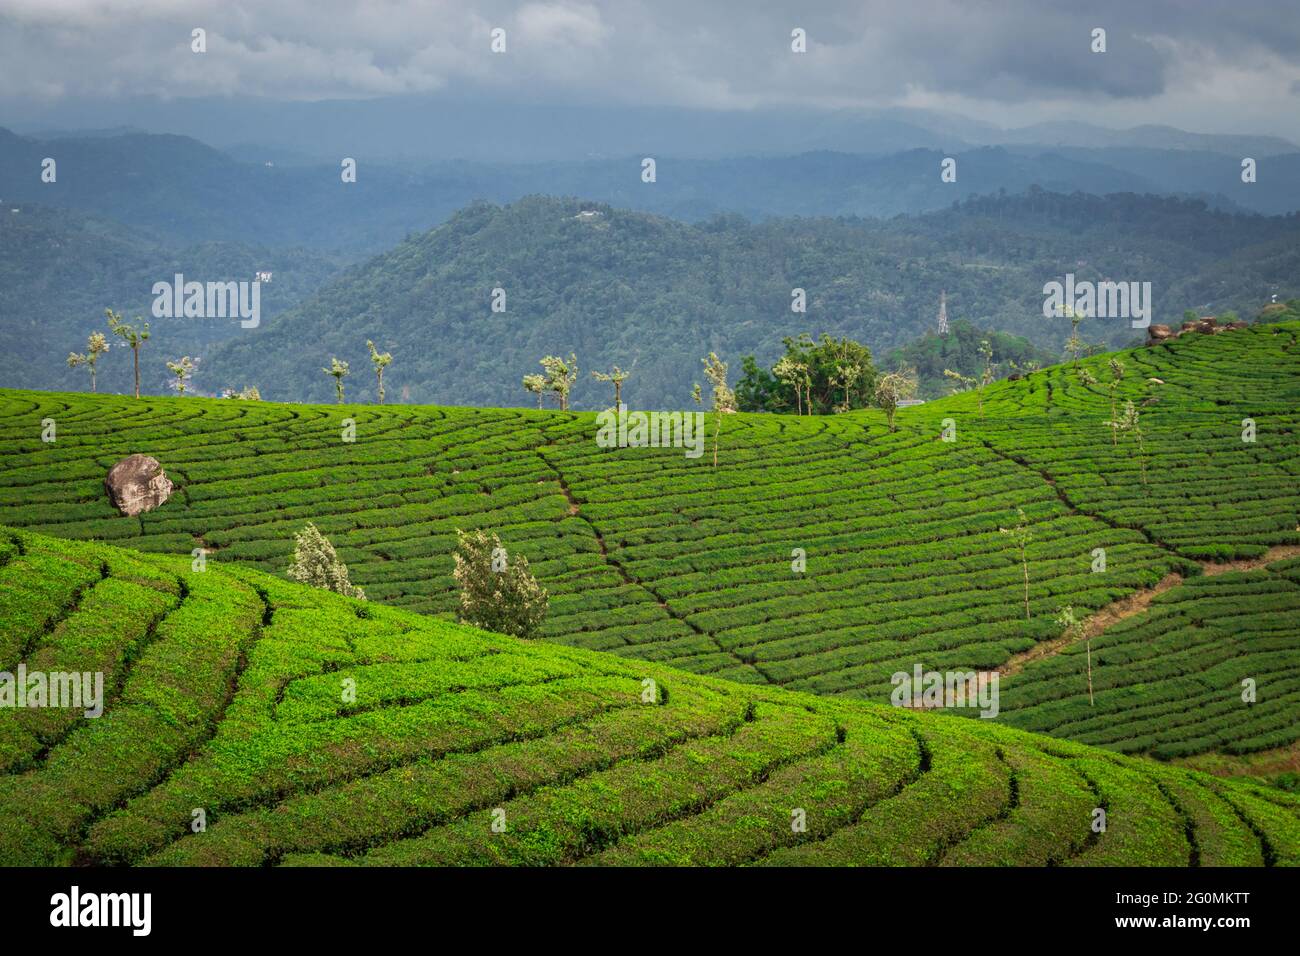 Tea gardens in the foothills of western ghat image take at India. The landscape is amazing with Green tea plantations in rows. Stock Photo